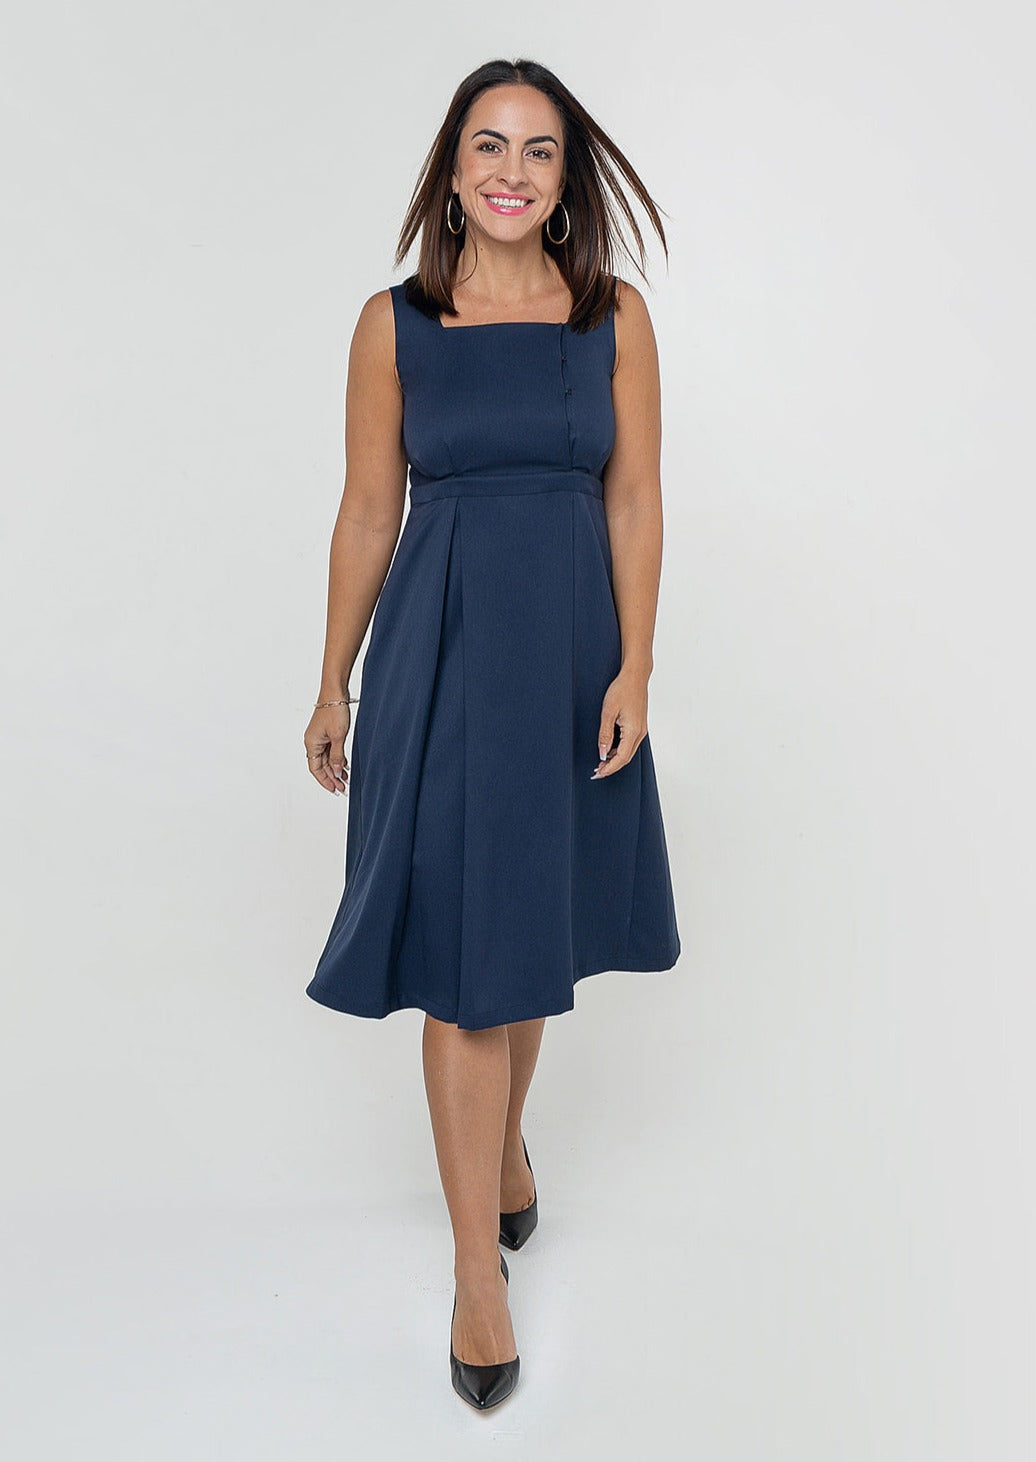 MARION Maternity blue dress, nursing dresses, fancy style with empire waist, pockets, and designer breastfeeding access. Made with luxury navy Italian fabric, washable, sustainable.